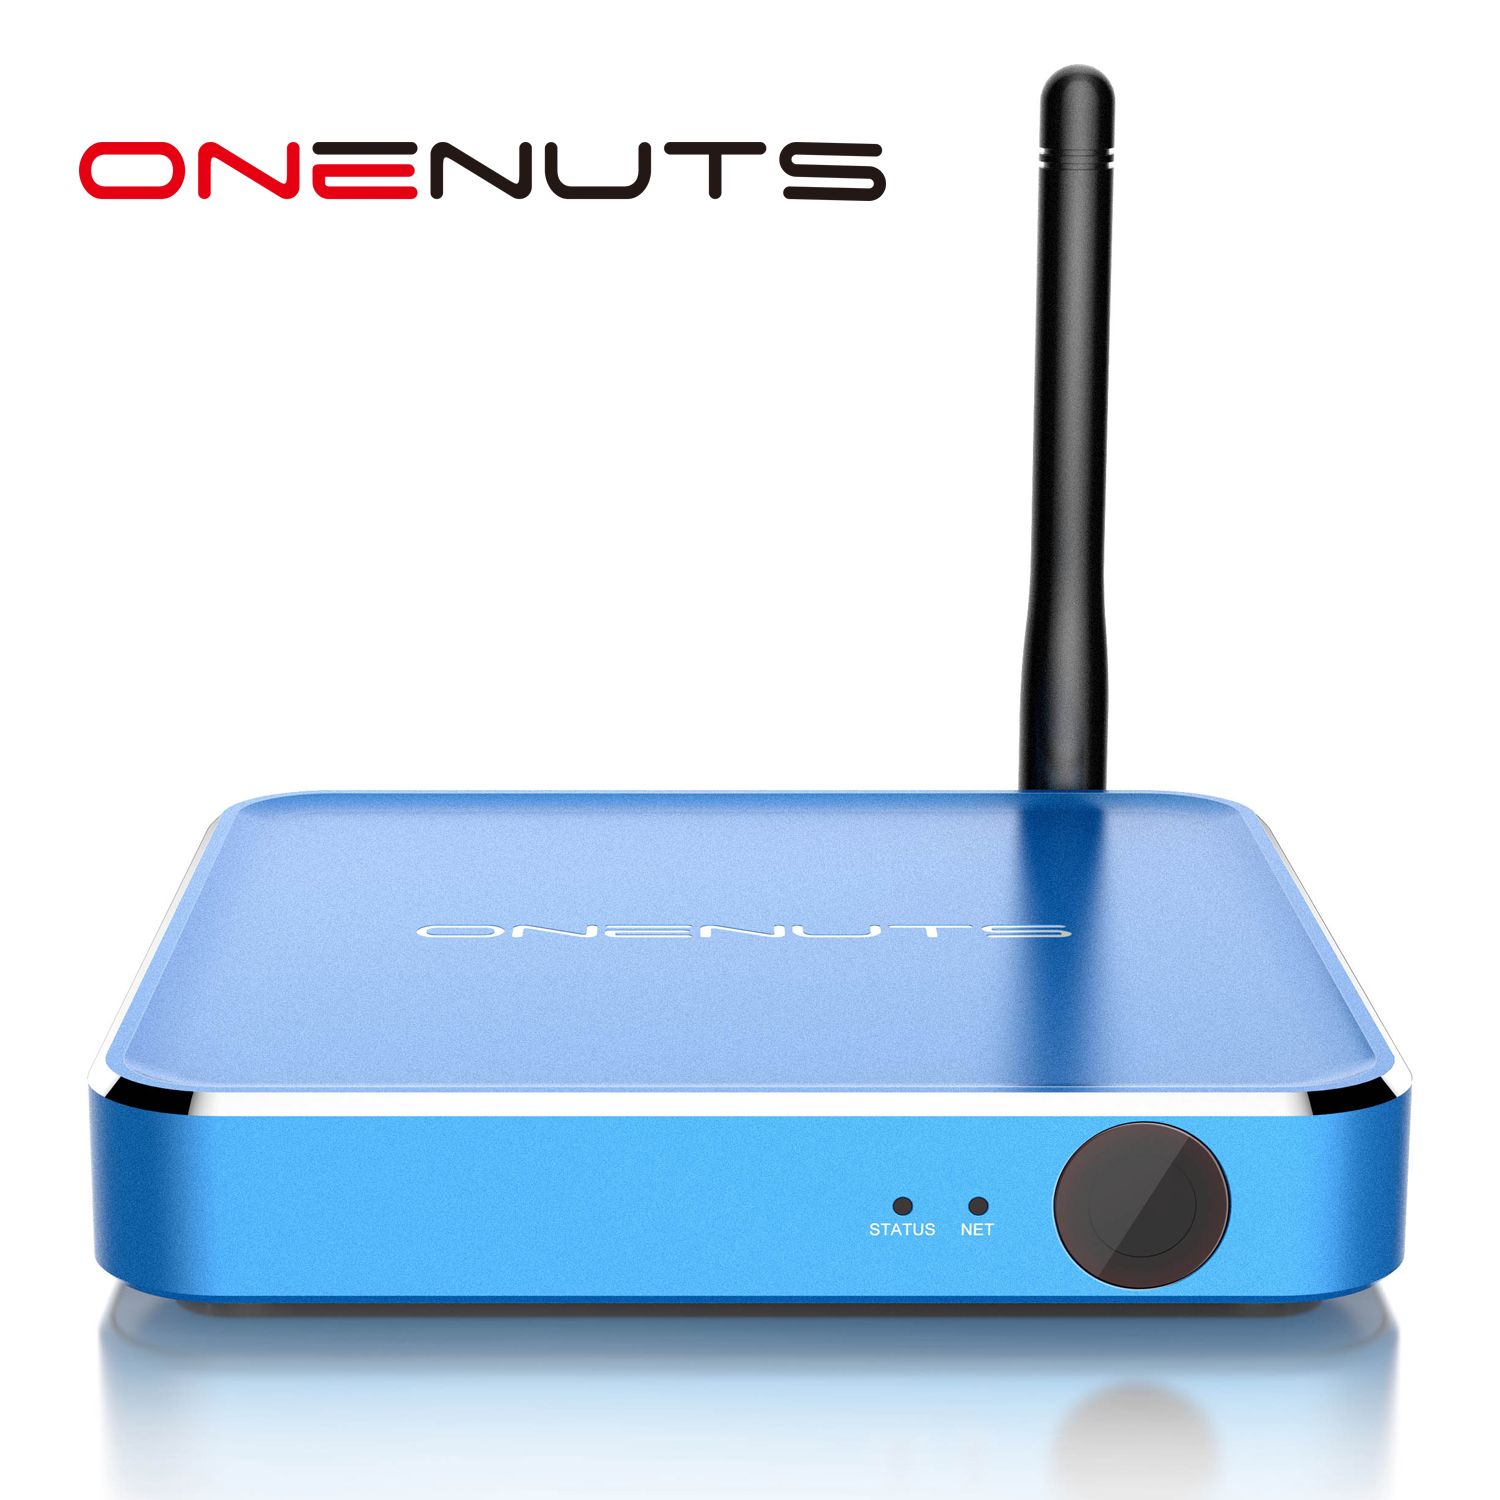 Network Media Player, New Android TV Box with Android 6.0